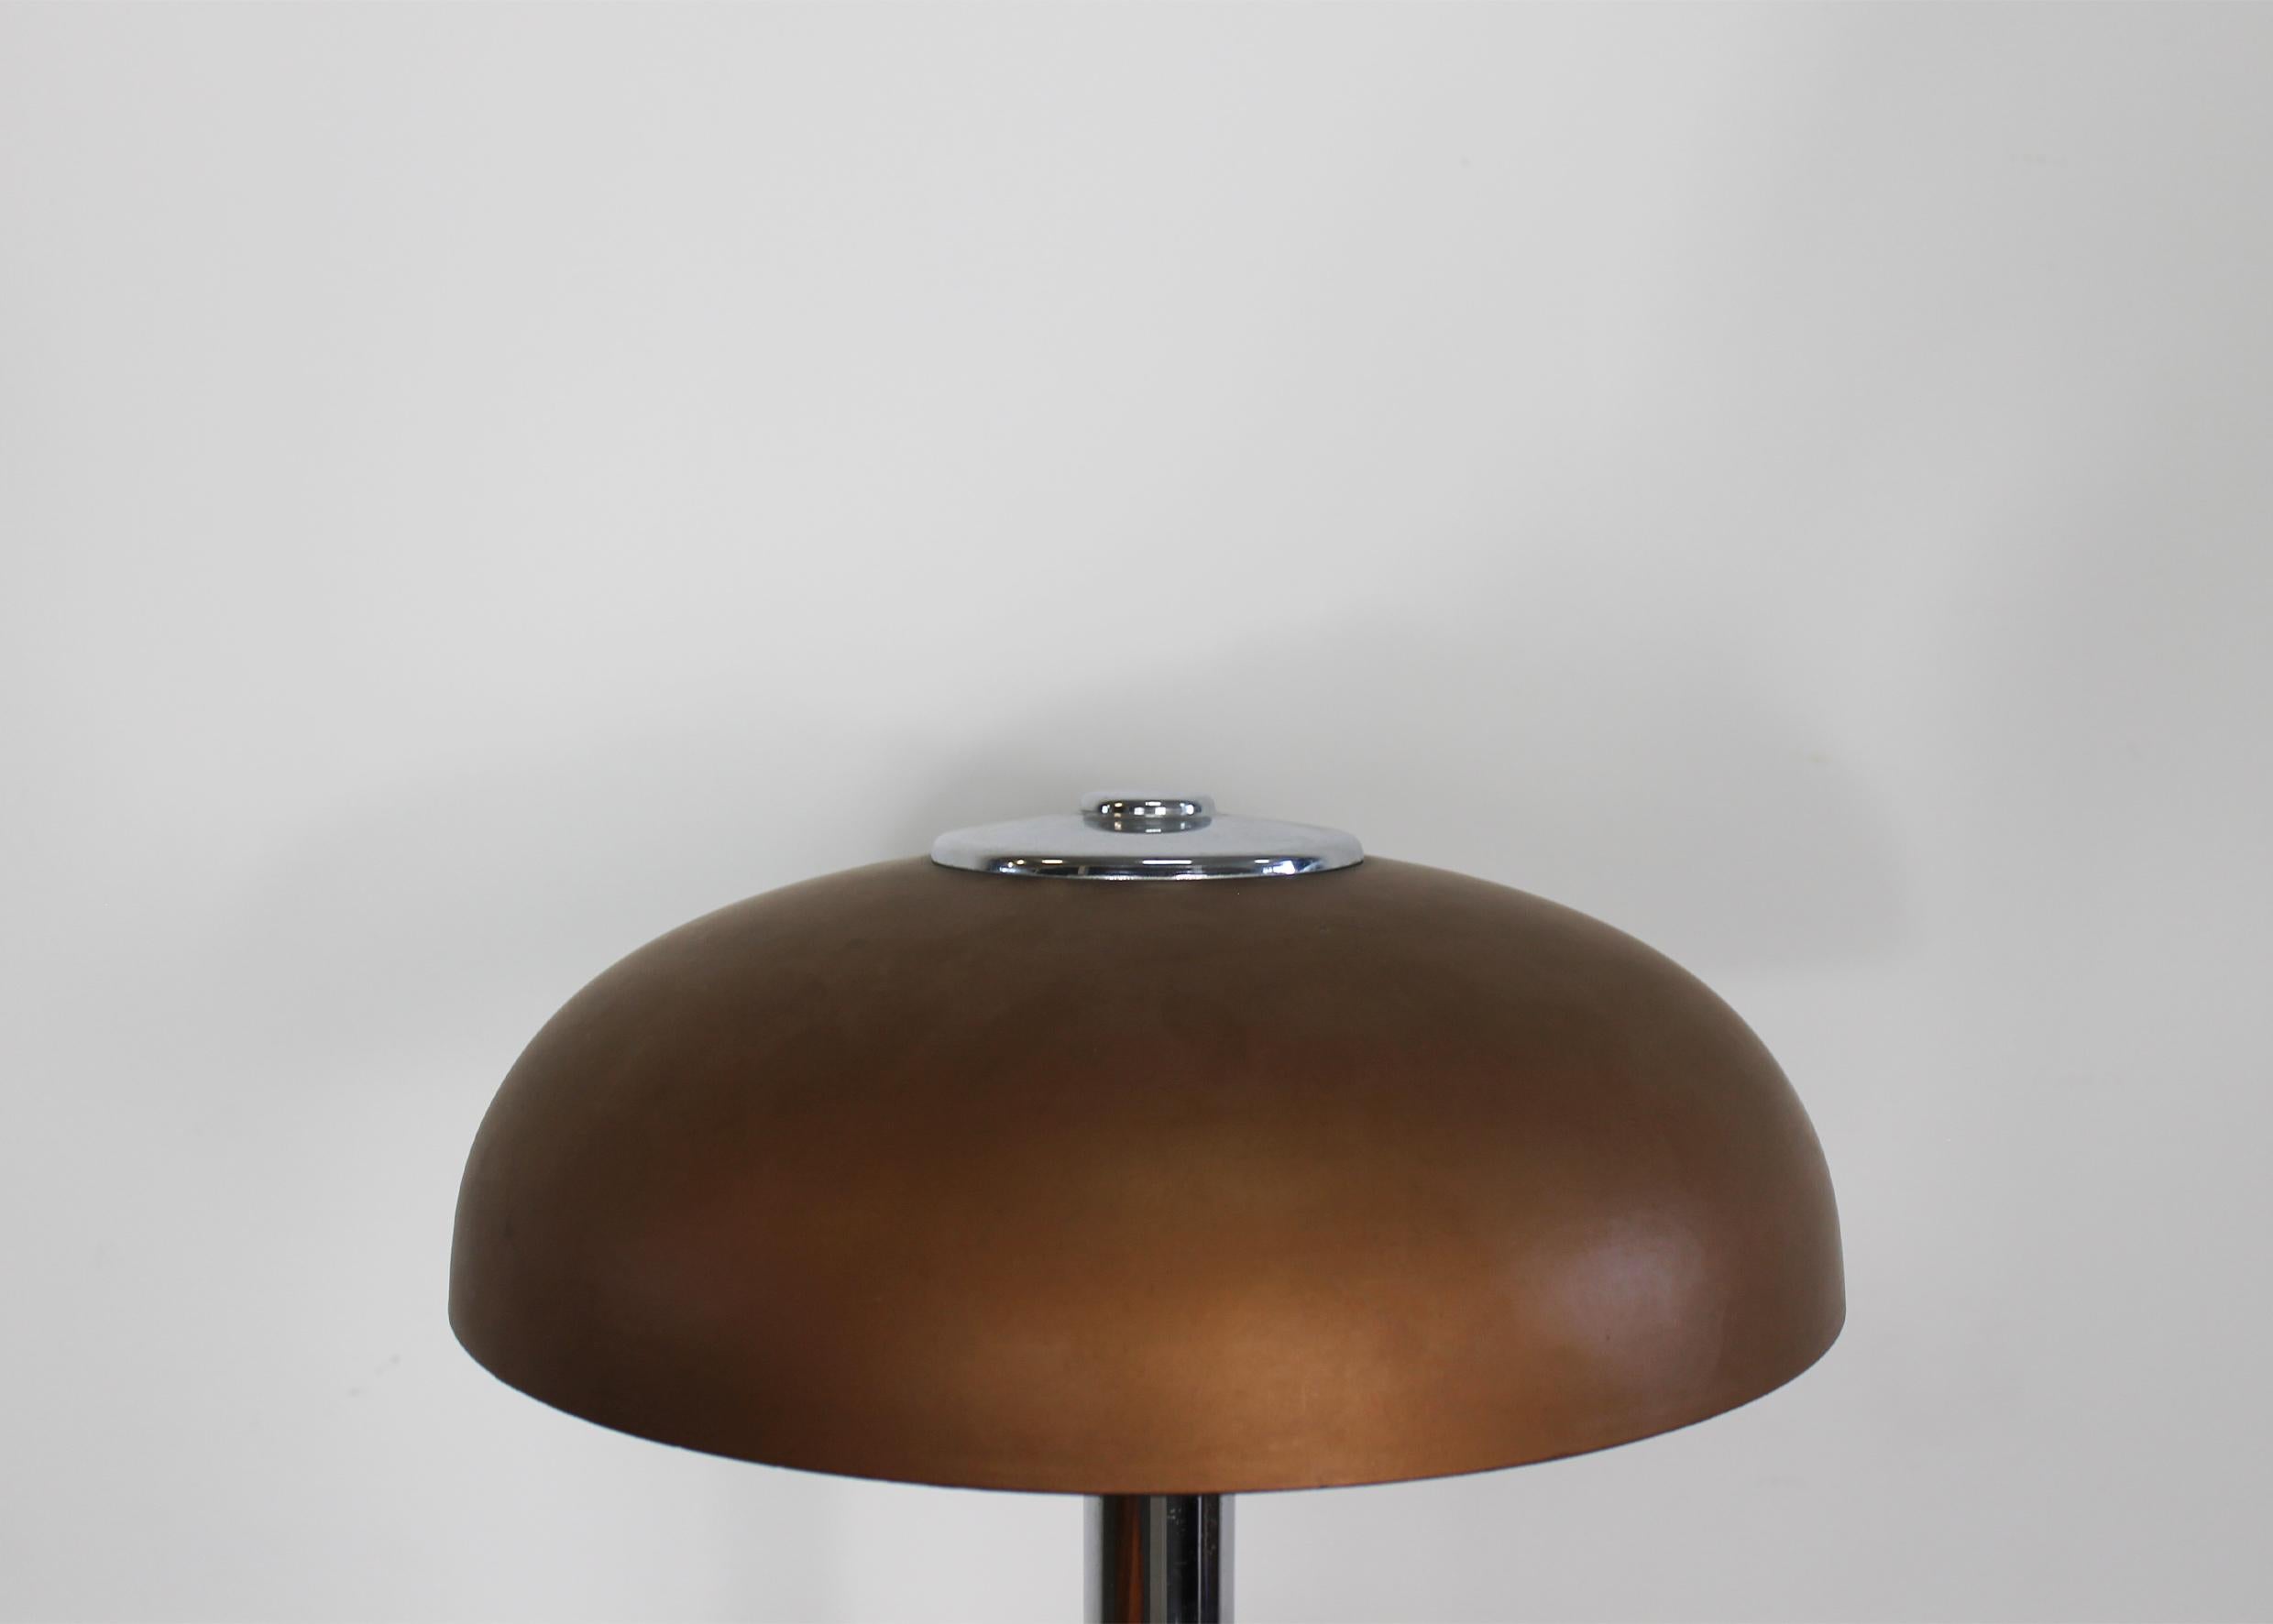 Italian Gio Ponti 546 Table Lamp in Aluminum and Opaline Glass by Ugo Pollice 1940s For Sale